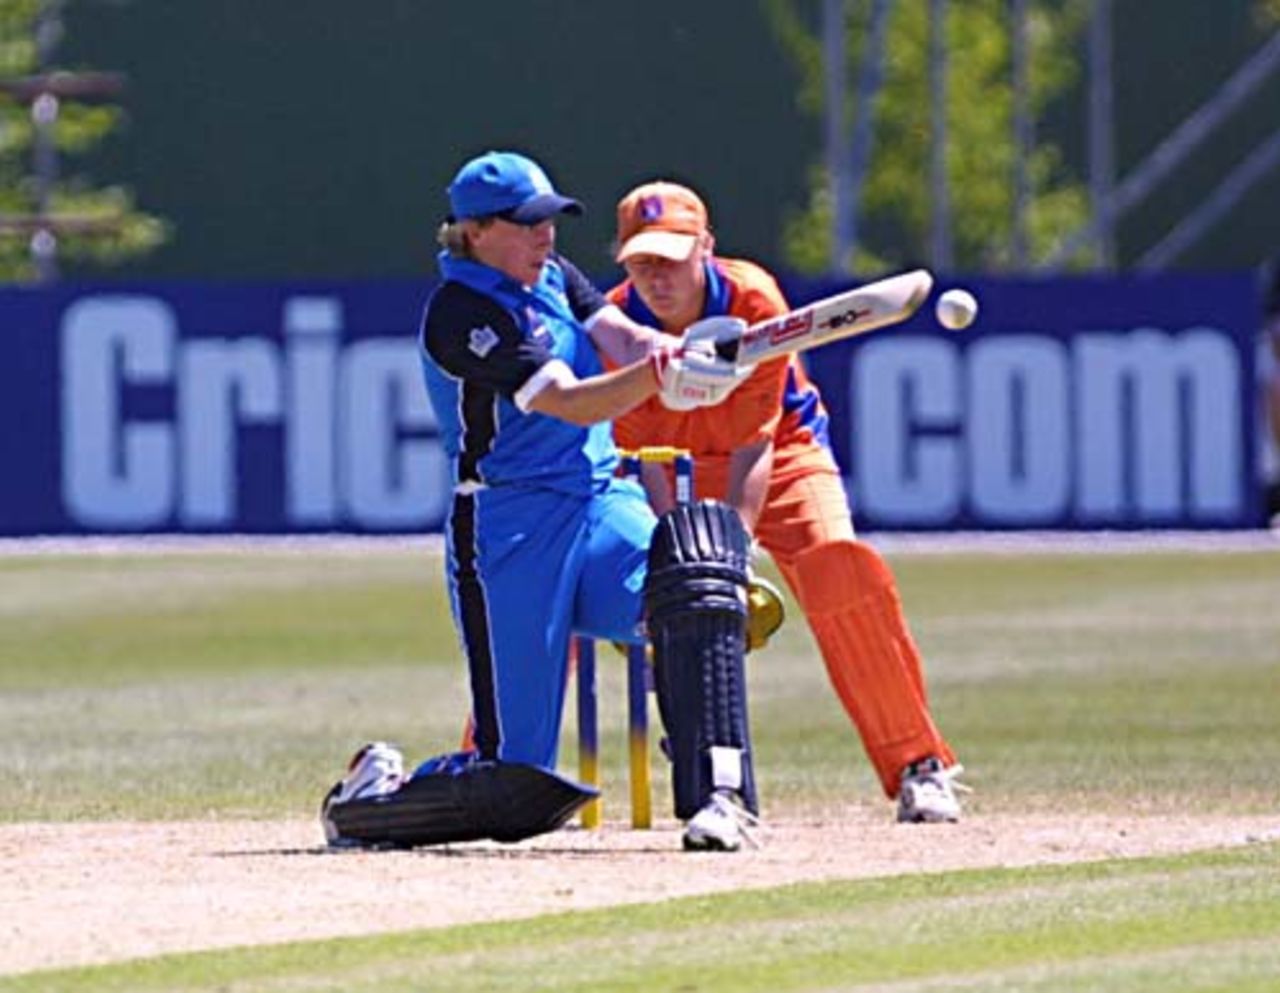 30 Nov 2000: England v Netherlands - CricInfo Women's World Cup 2000 played at the BIL Oval of Lincoln University